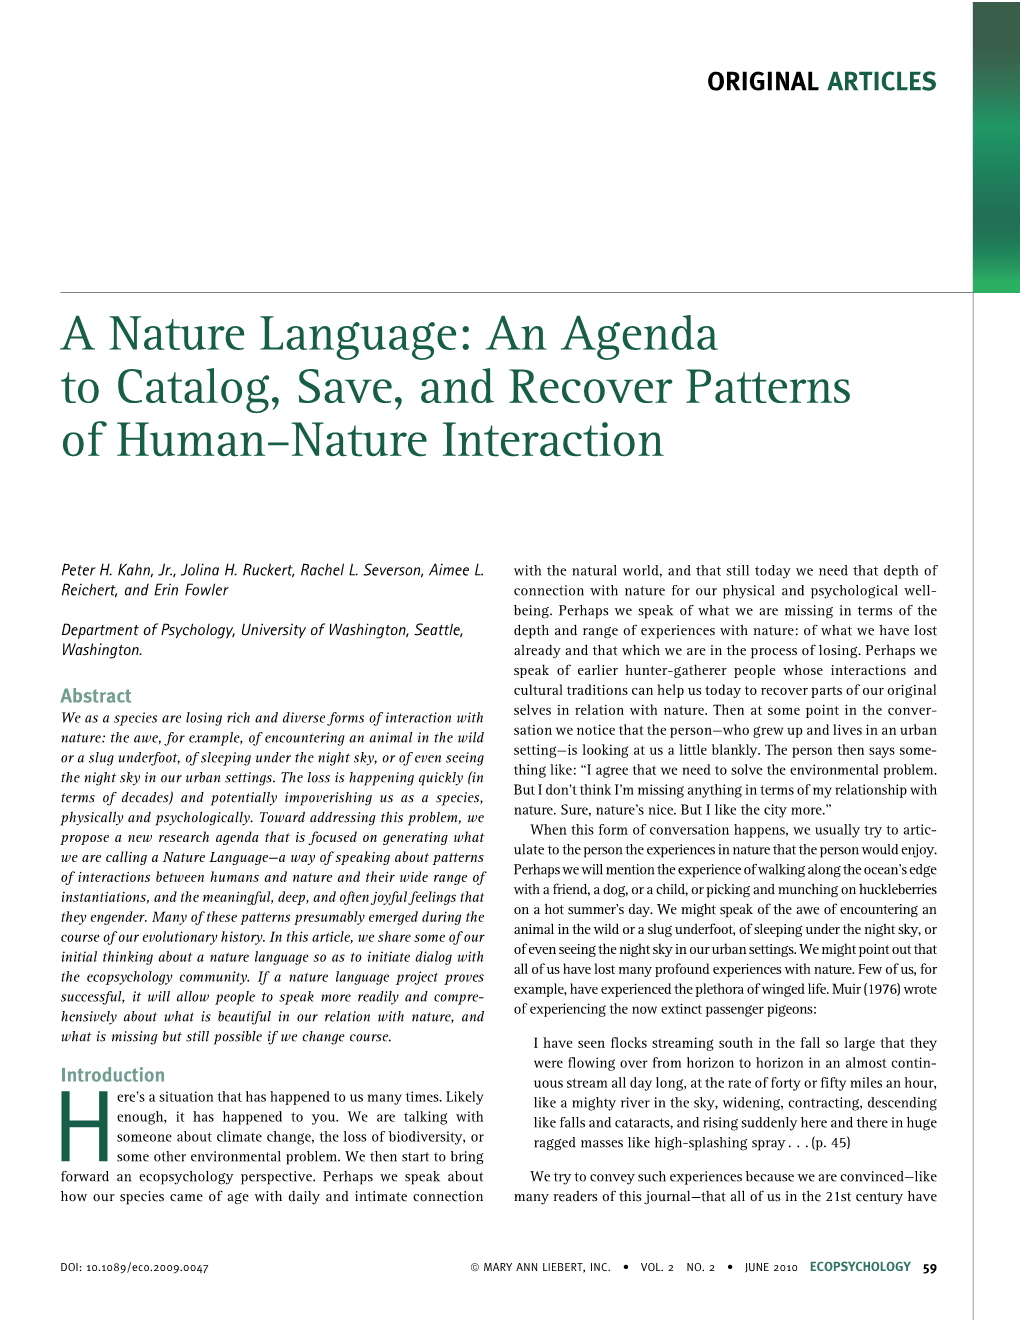 A Nature Language: an Agenda to Catalog, Save, and Recover Patterns of Human–Nature Interaction